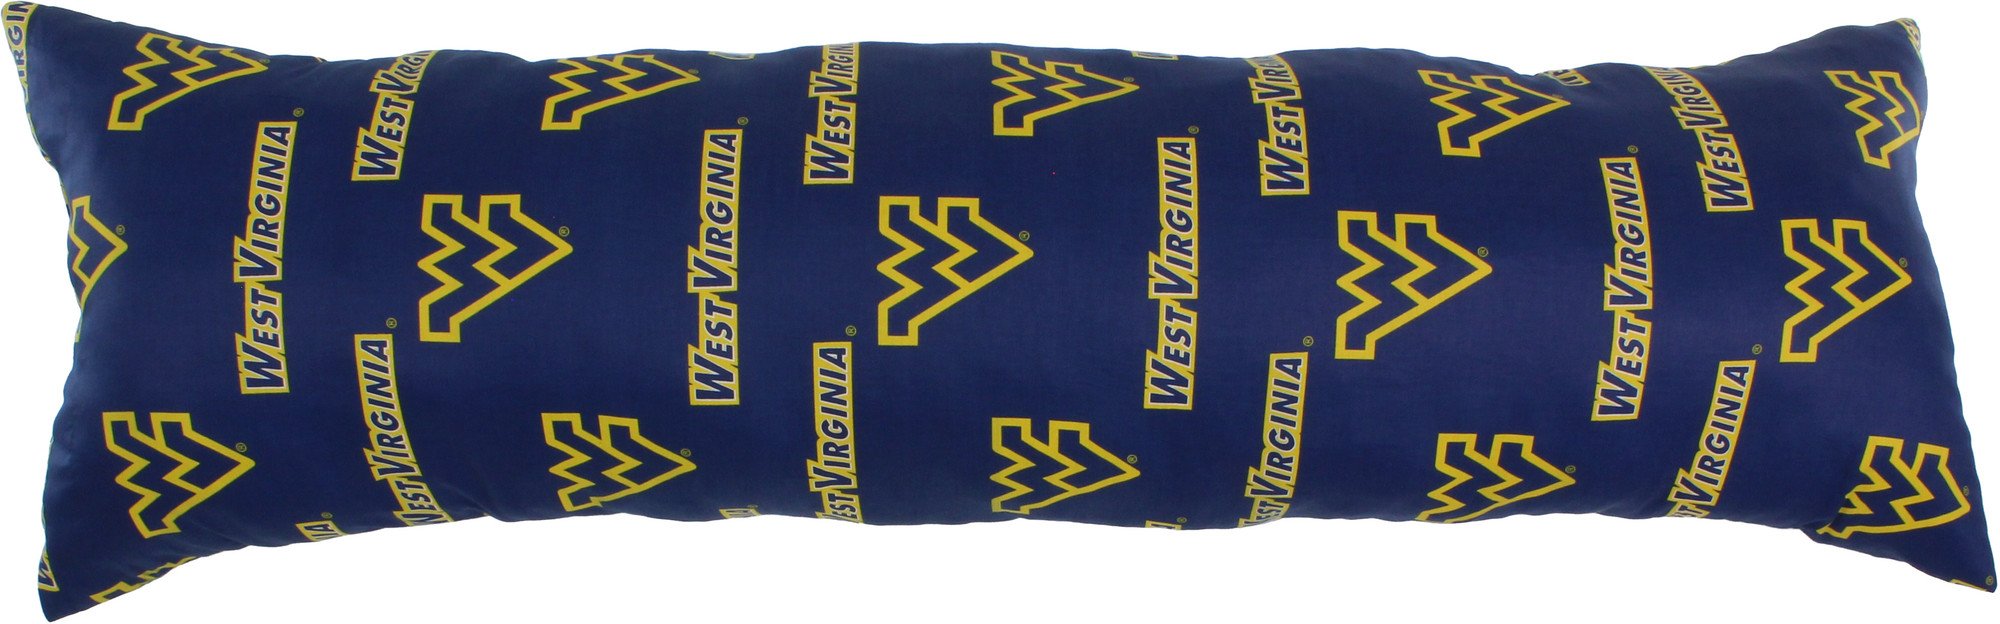 West Virginia Mountaineers Printed Body Pillow